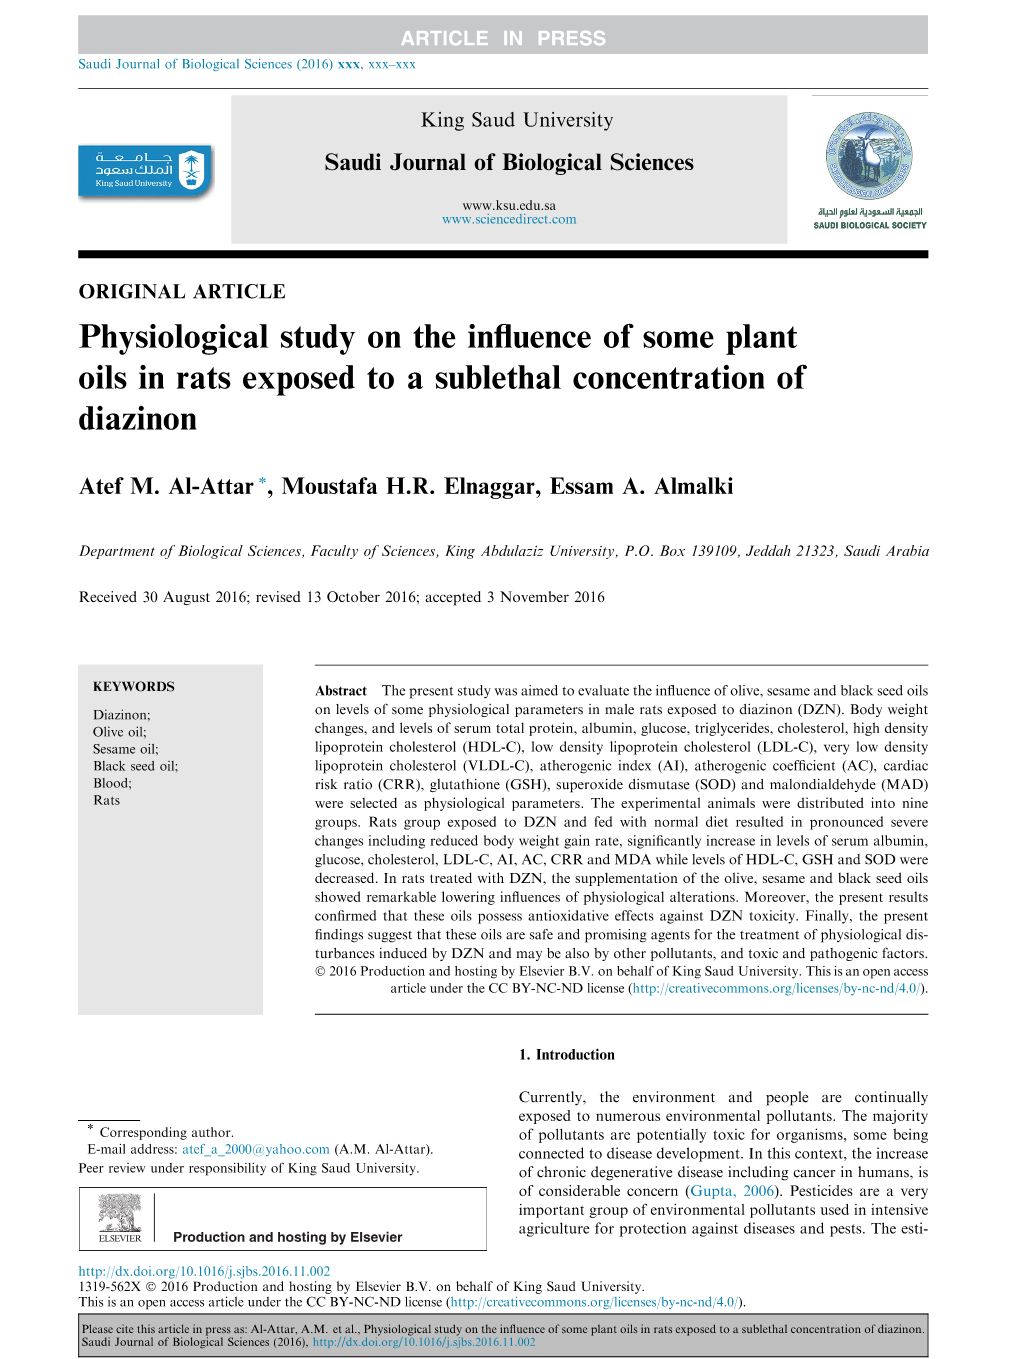 Physiological Study on the Influence of Some Plant Oils in Rats Exposed to A